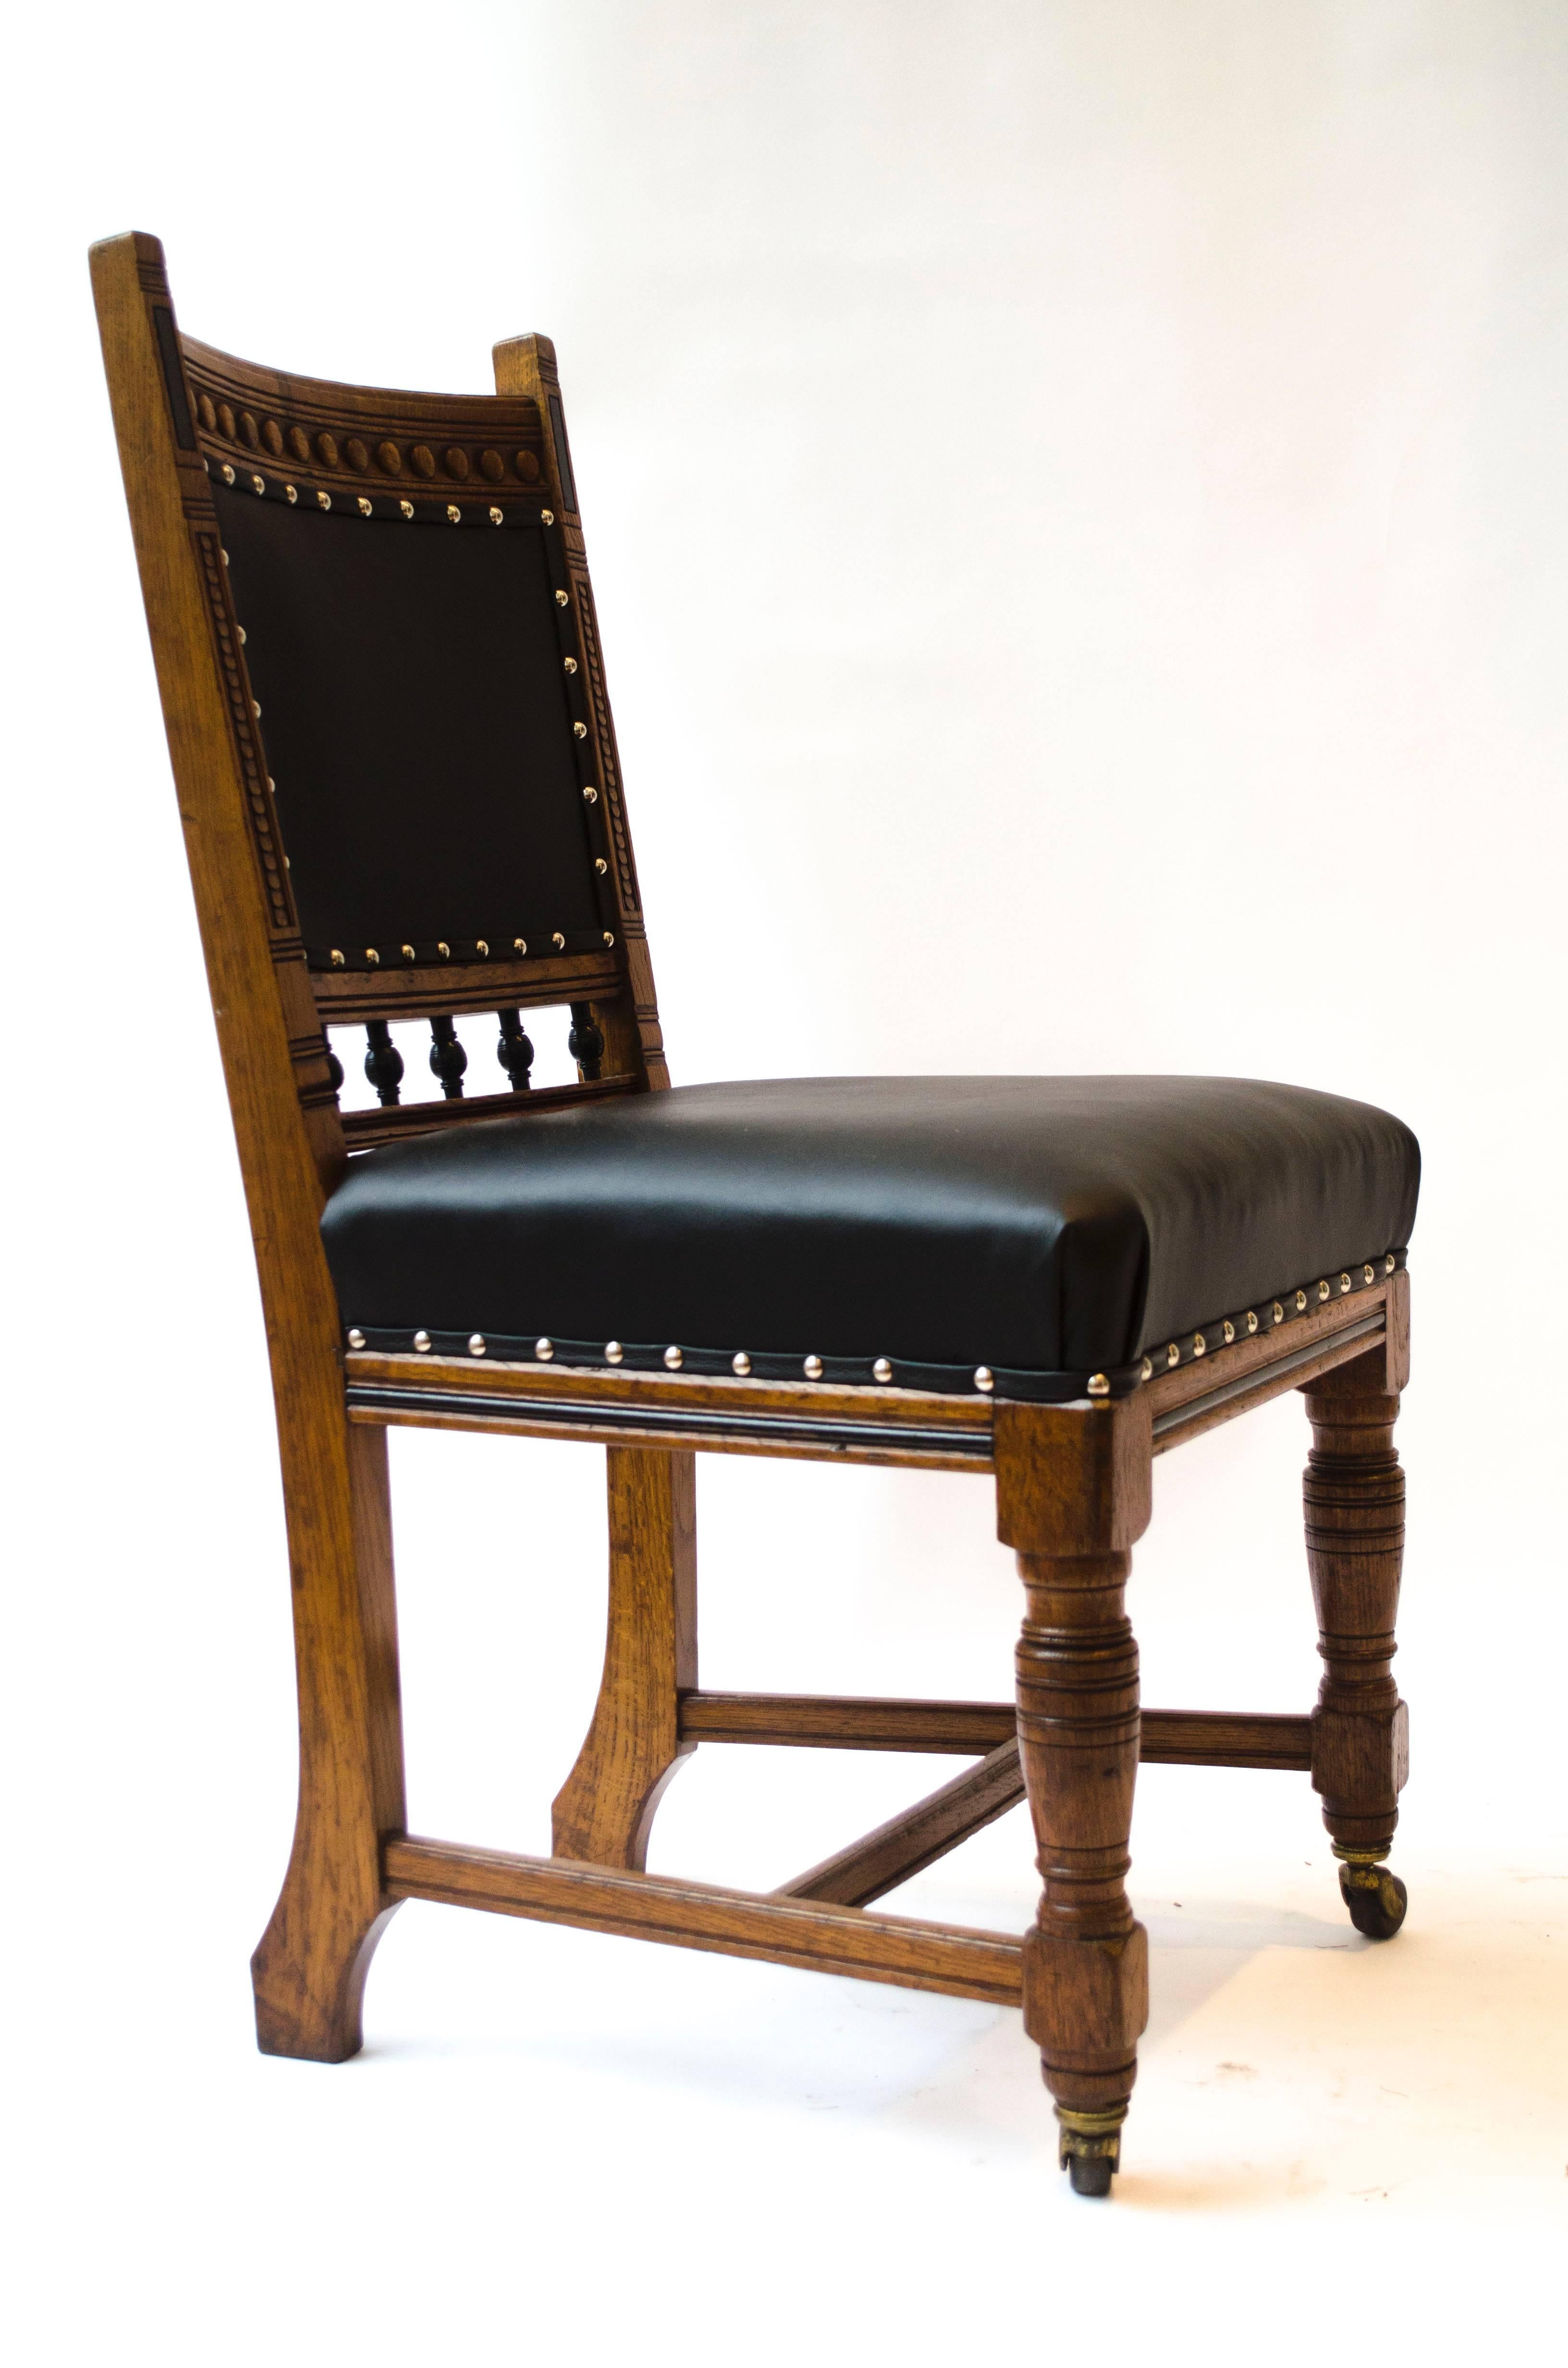 Lambs of Manchester A Set of Four Aesthetic Movement Oak Dining Chairs with carved and part ebonised details, professionally reupholstered in a quality matt black leather.